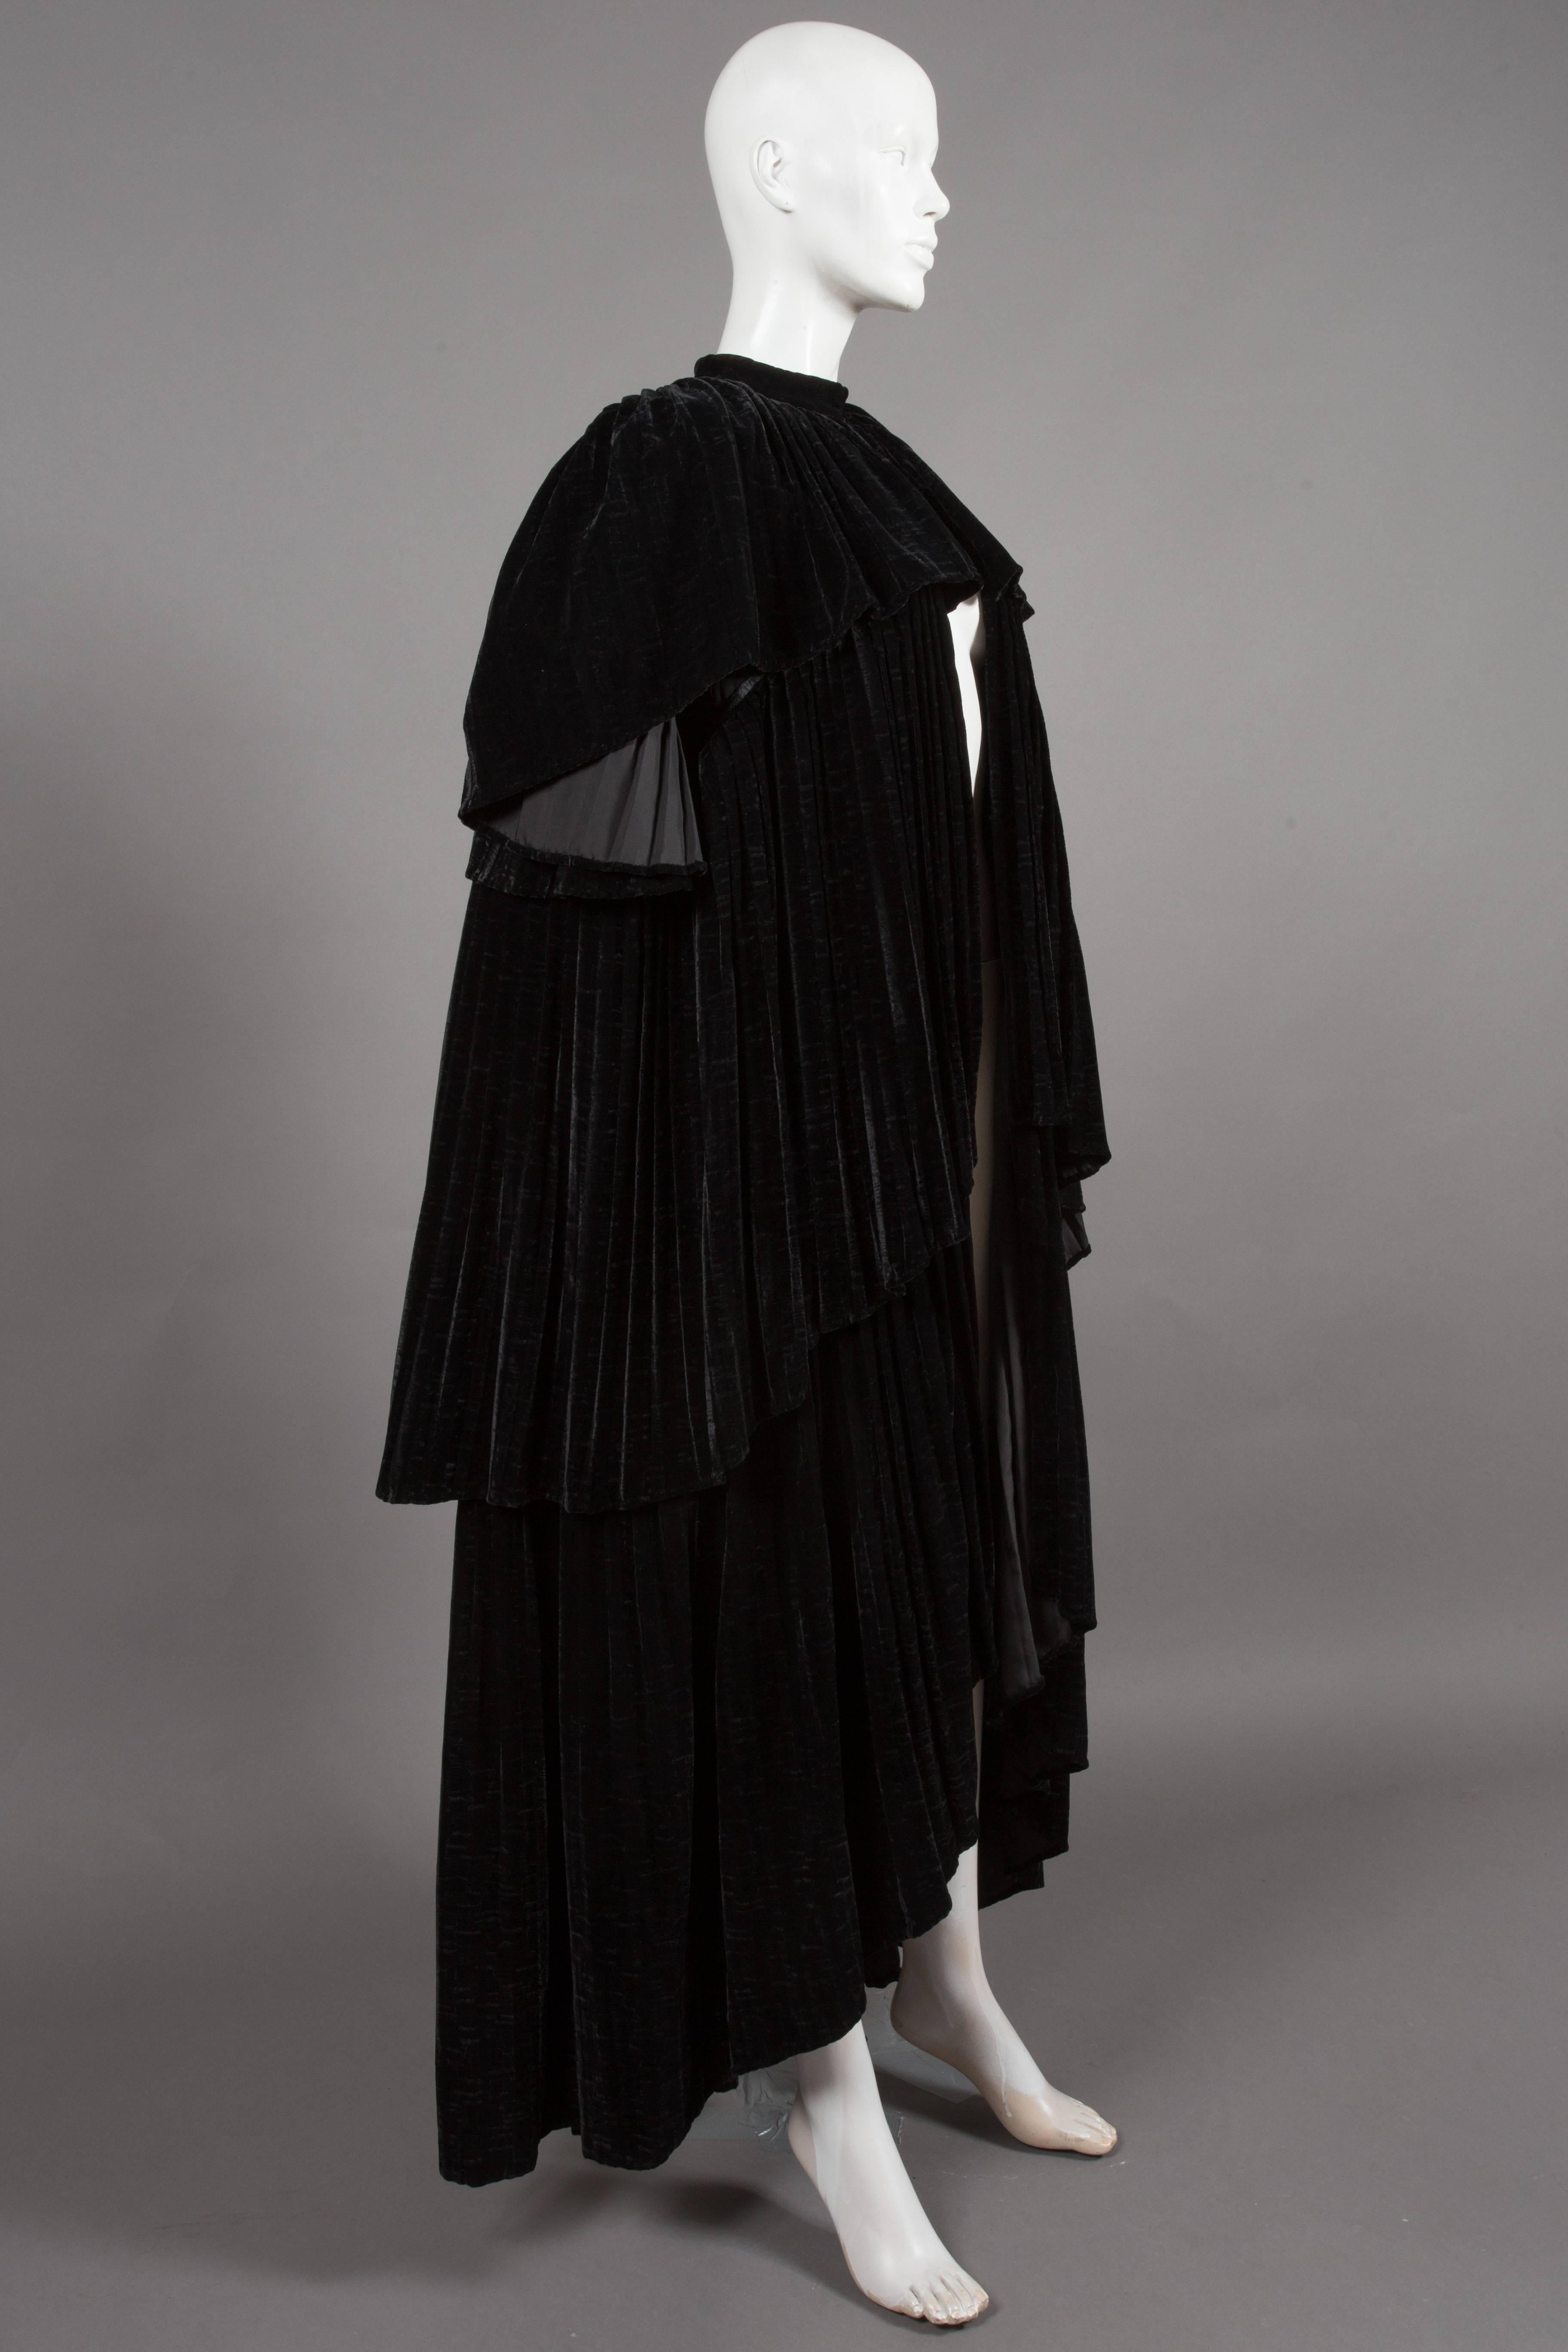 Exquisite Thea Porter Couture black silk-velvet tiered evening cape coat, circa 1970. The cape features heavy pleats through out, three tiers and hook-and-eye closures on collar. The cape is shorter at the front and gradually gets longer towards the